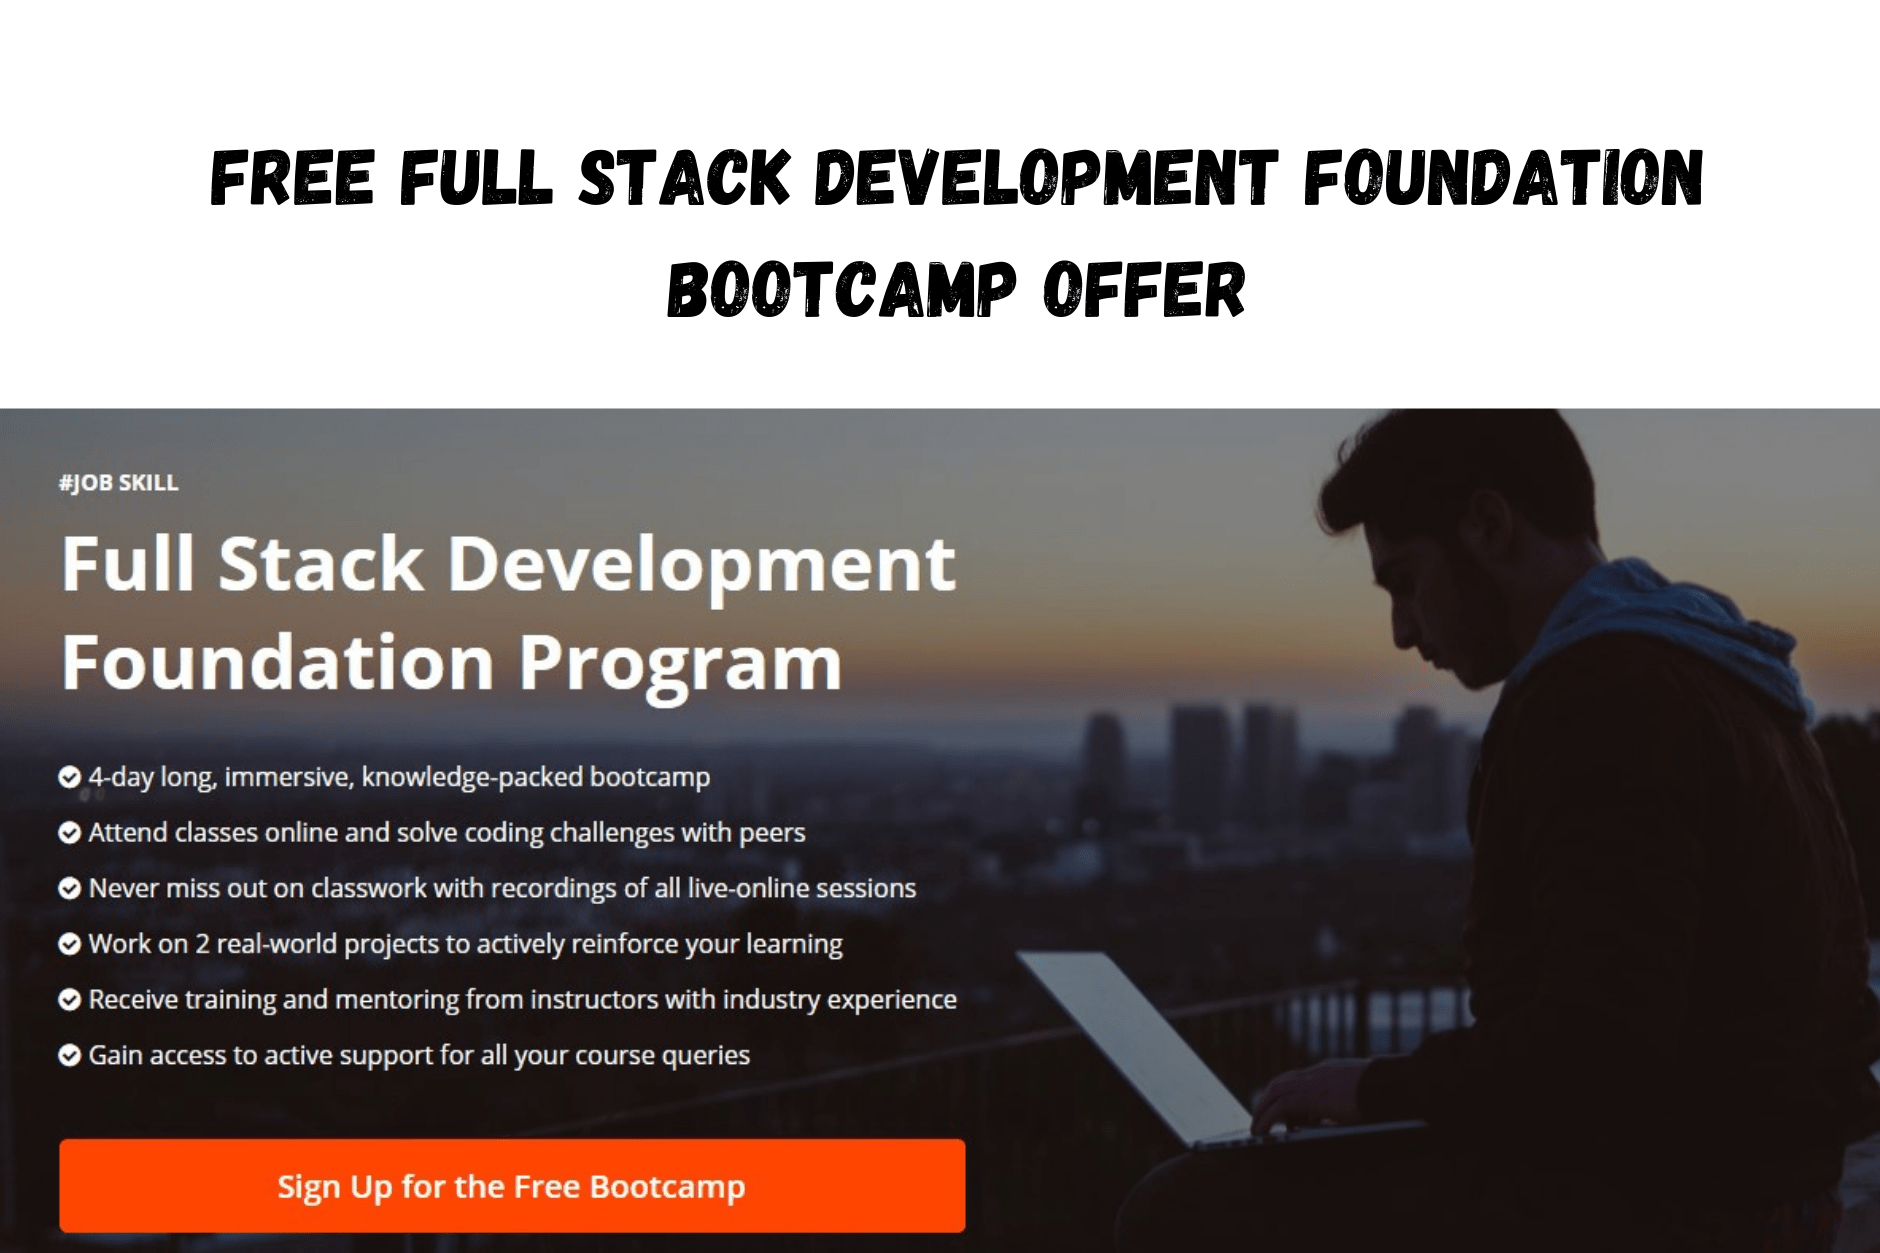 Free Full Stack Development Foundation Bootcamp offer